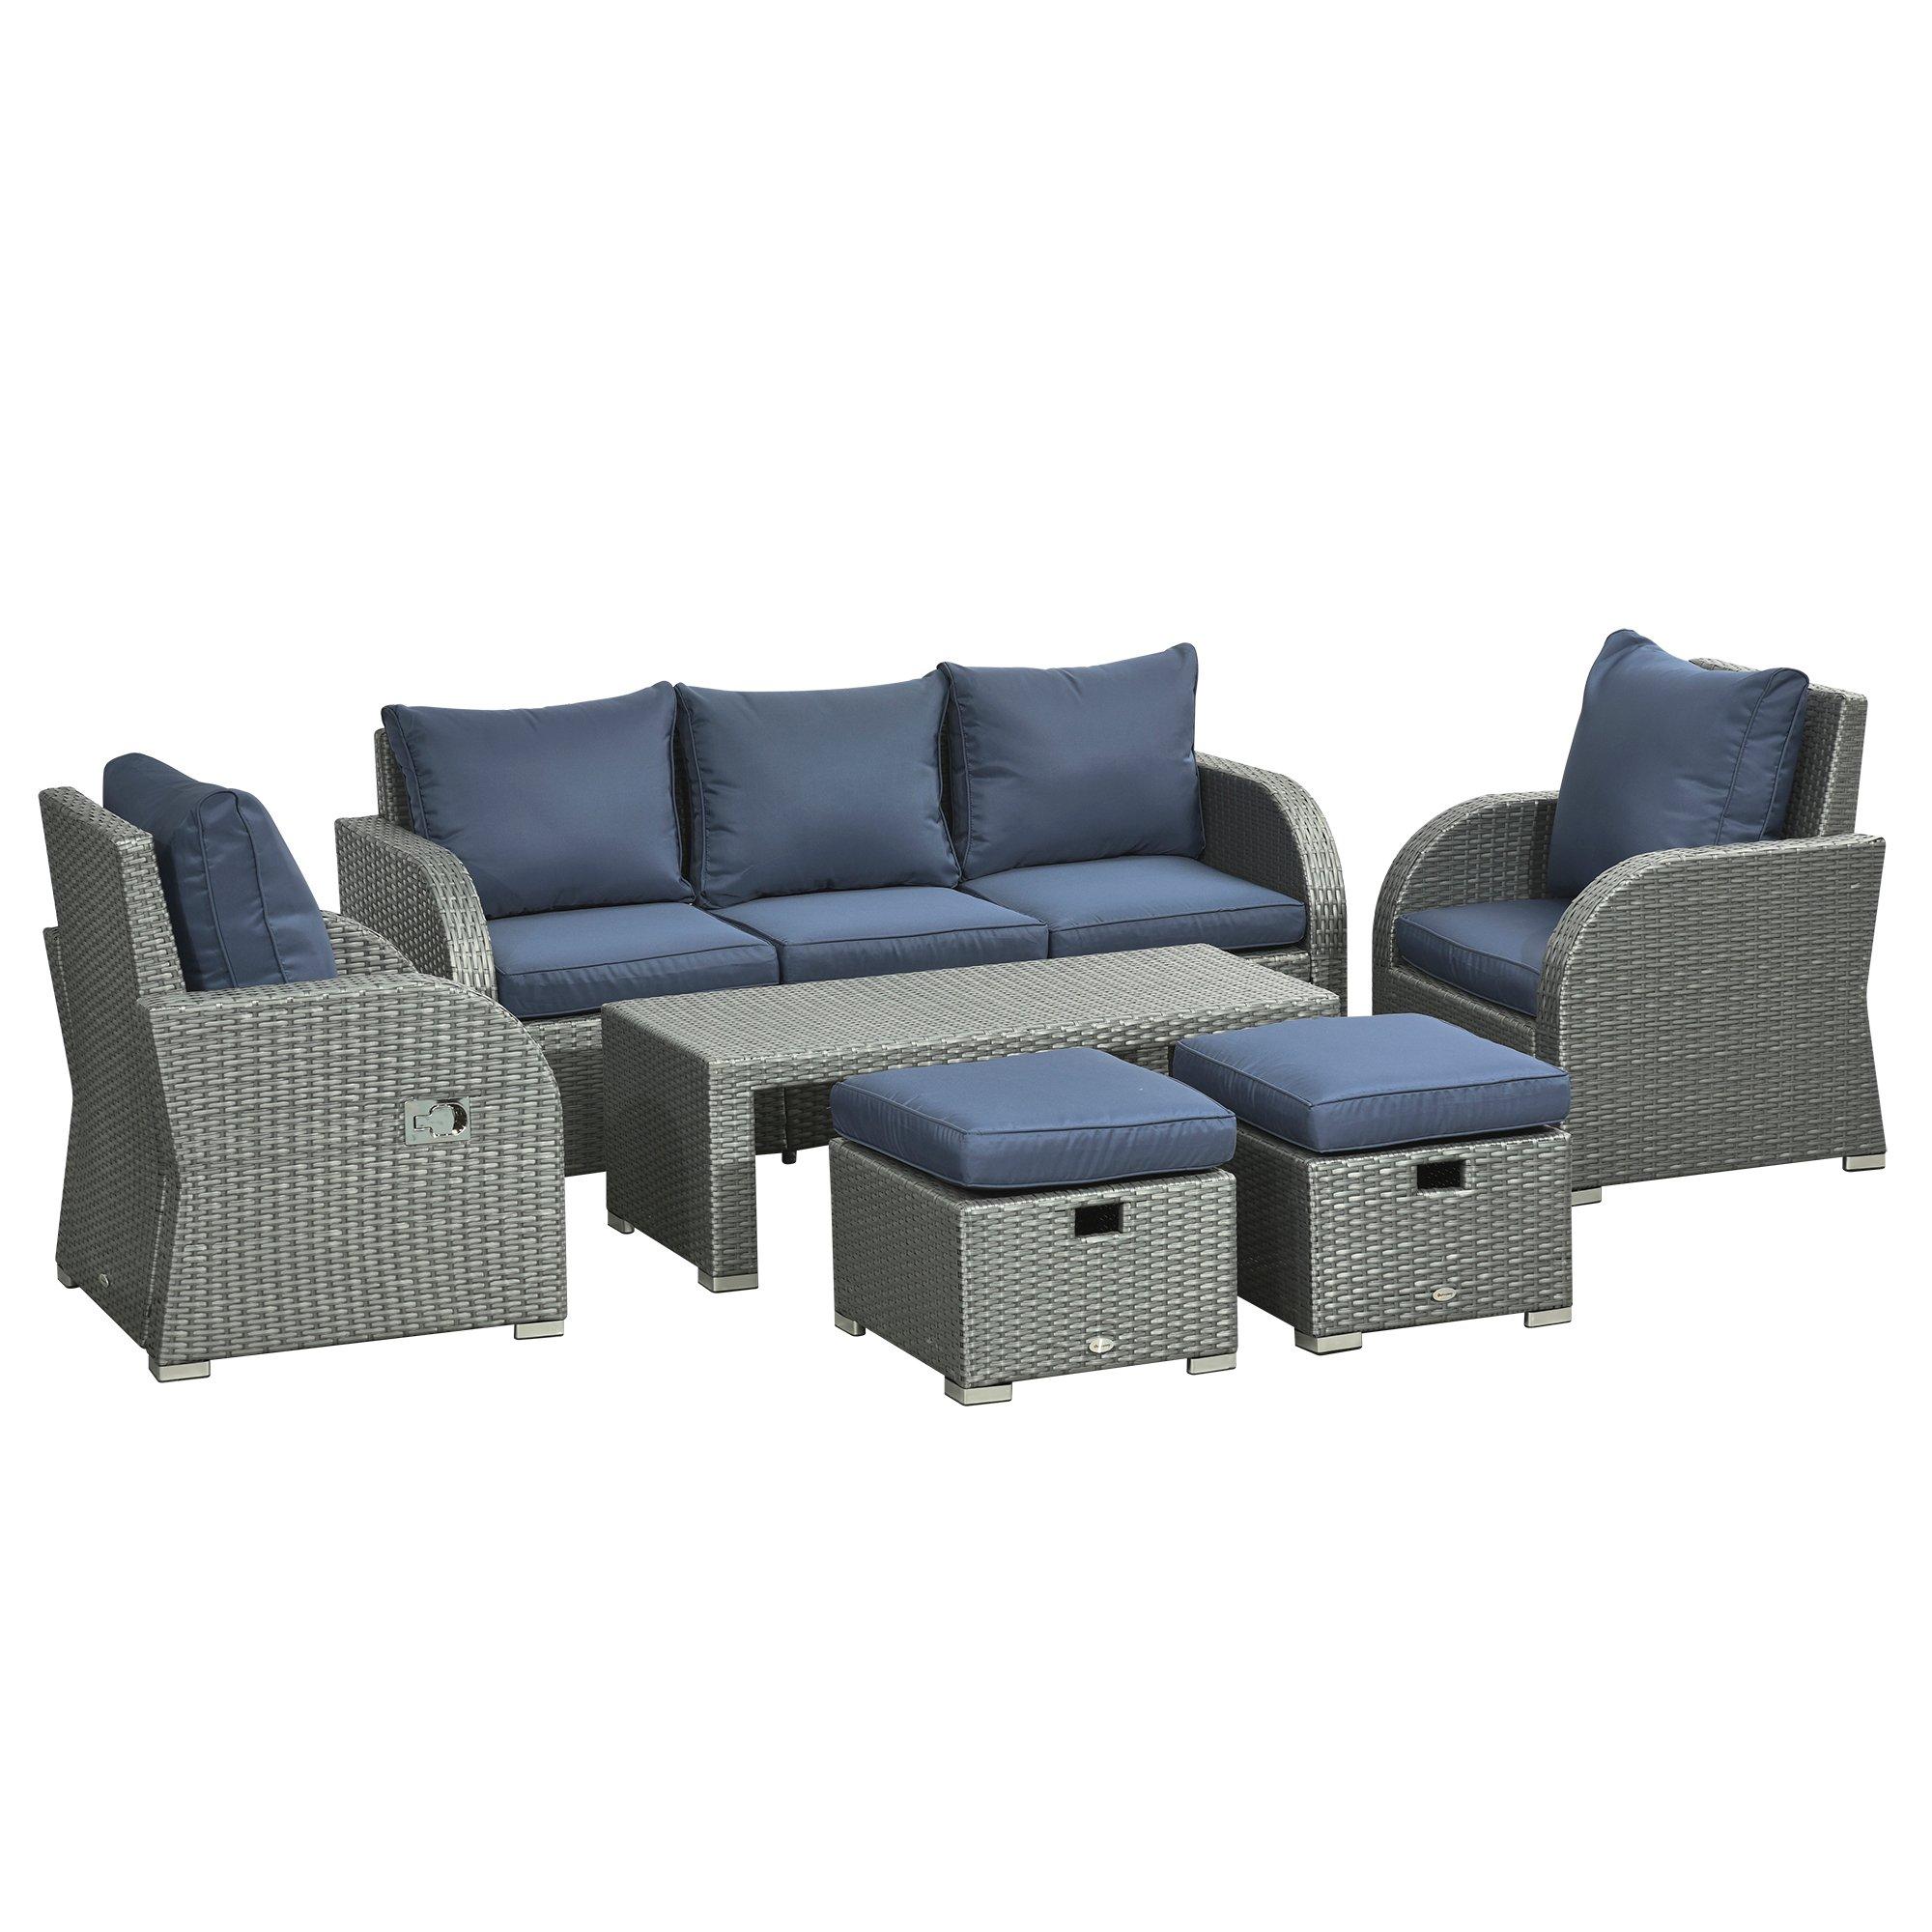 6pc Cushioned Outdoor Rattan Wicker 3-Seat Sofa, Recliner, Footstool, Table Set